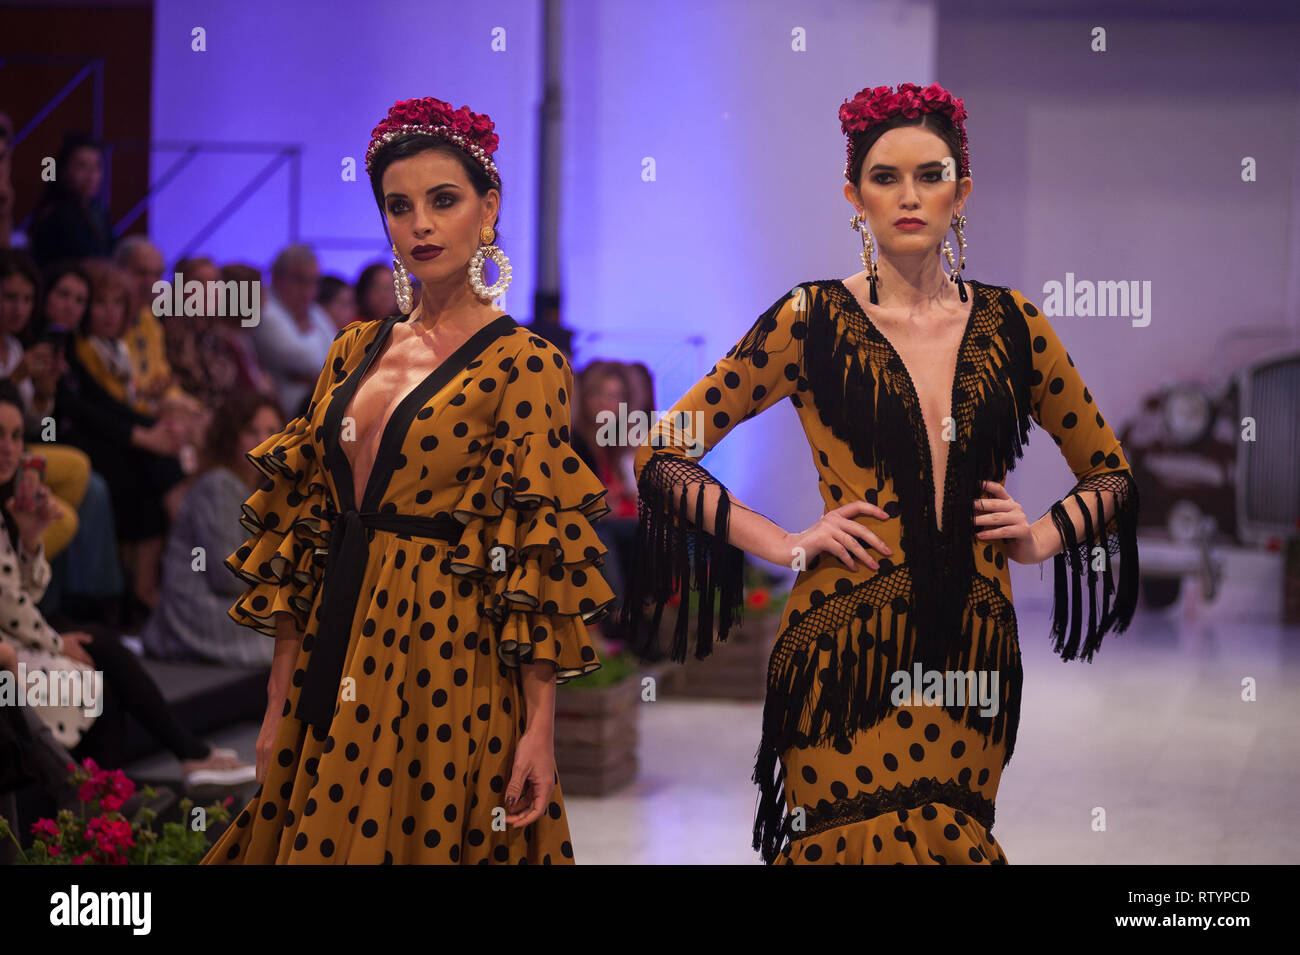 Malaga, Spain. 3rd Mar, 2019. Models are wearing flamenco dresses as they pose for photographers on the catwalk during the IV International Flamenco Fashion Fair (FIMAF) at hotel NH in downtown city. Every year a new edition of the International Flamenco Fashion Fair happens, a meeting with designers to promote and present the pre-season flamenco fashion designs. The flamenco fashion industry is an economic engine from Andalusia, and its culture is recognized internationally. Credit: Jesus Merida/SOPA Images/ZUMA Wire/Alamy Live News Stock Photo